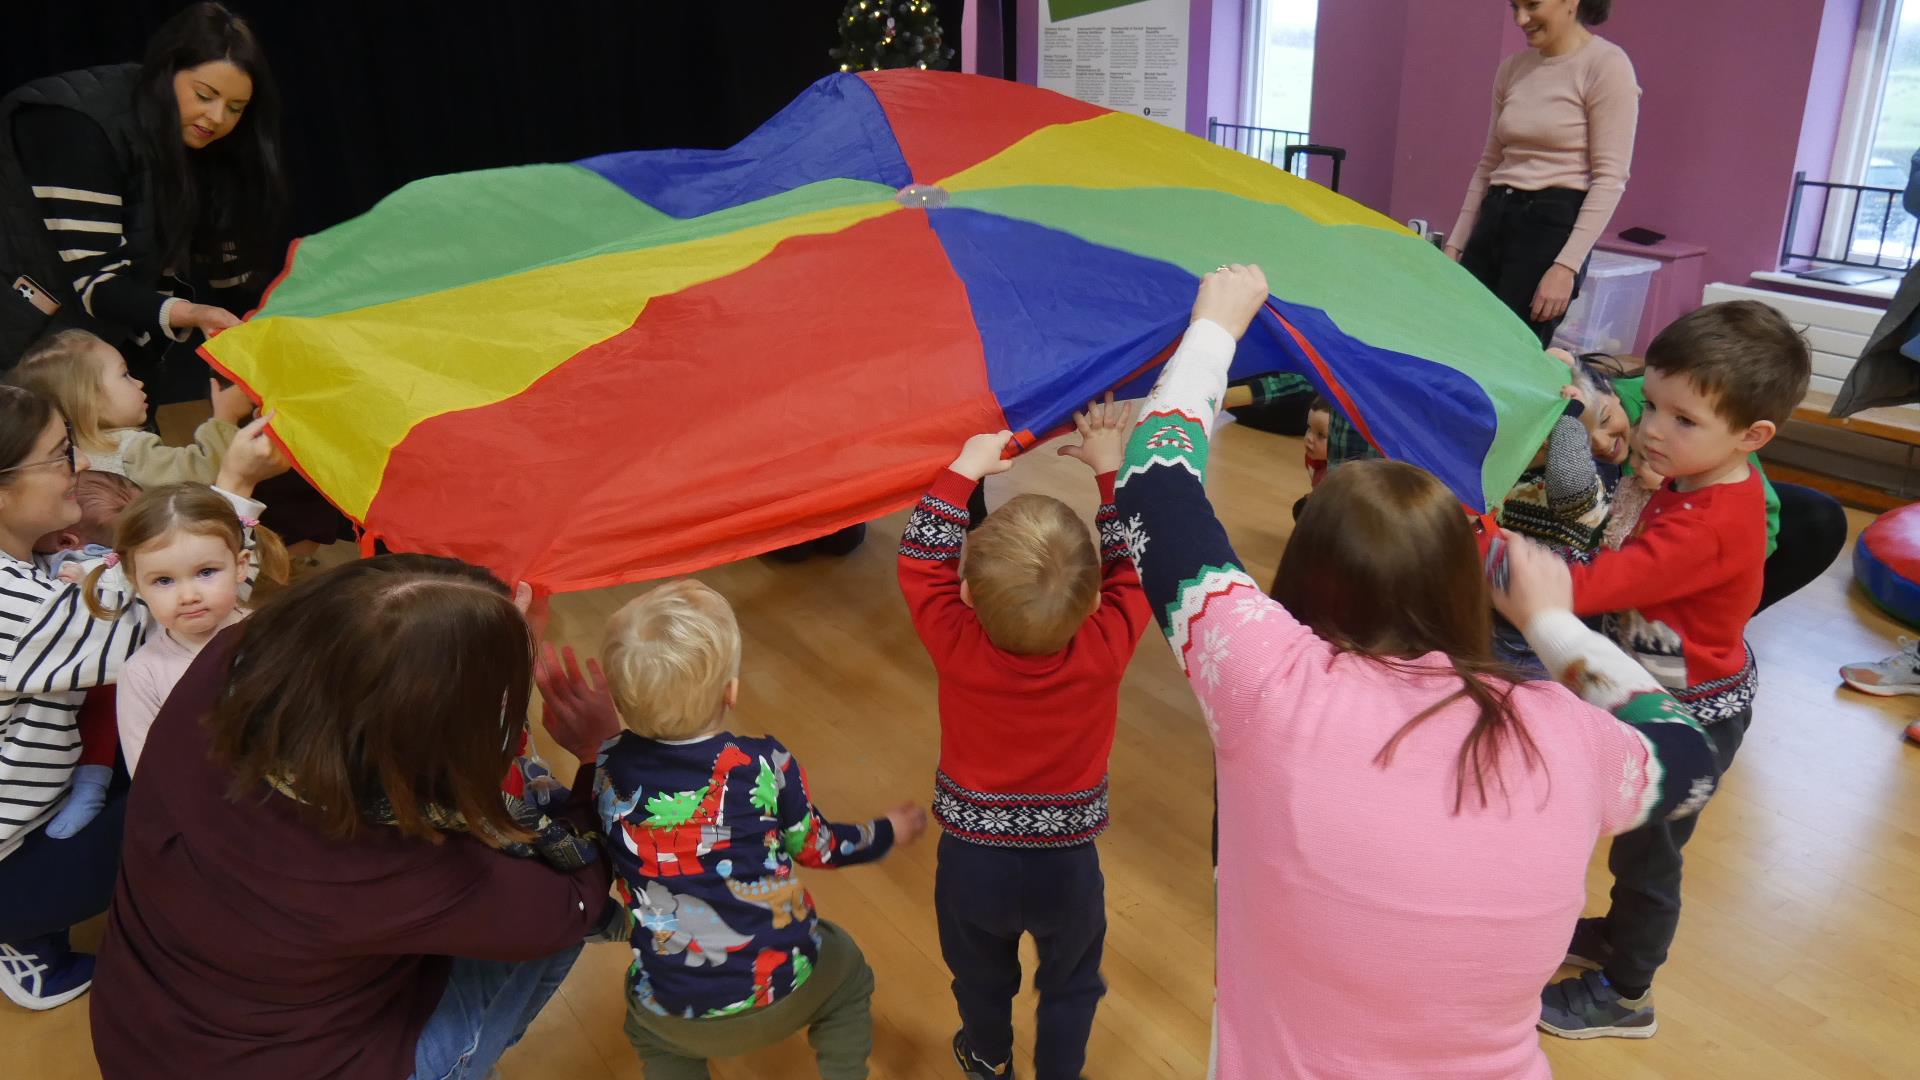 Image of kids playing with a colourful tarp